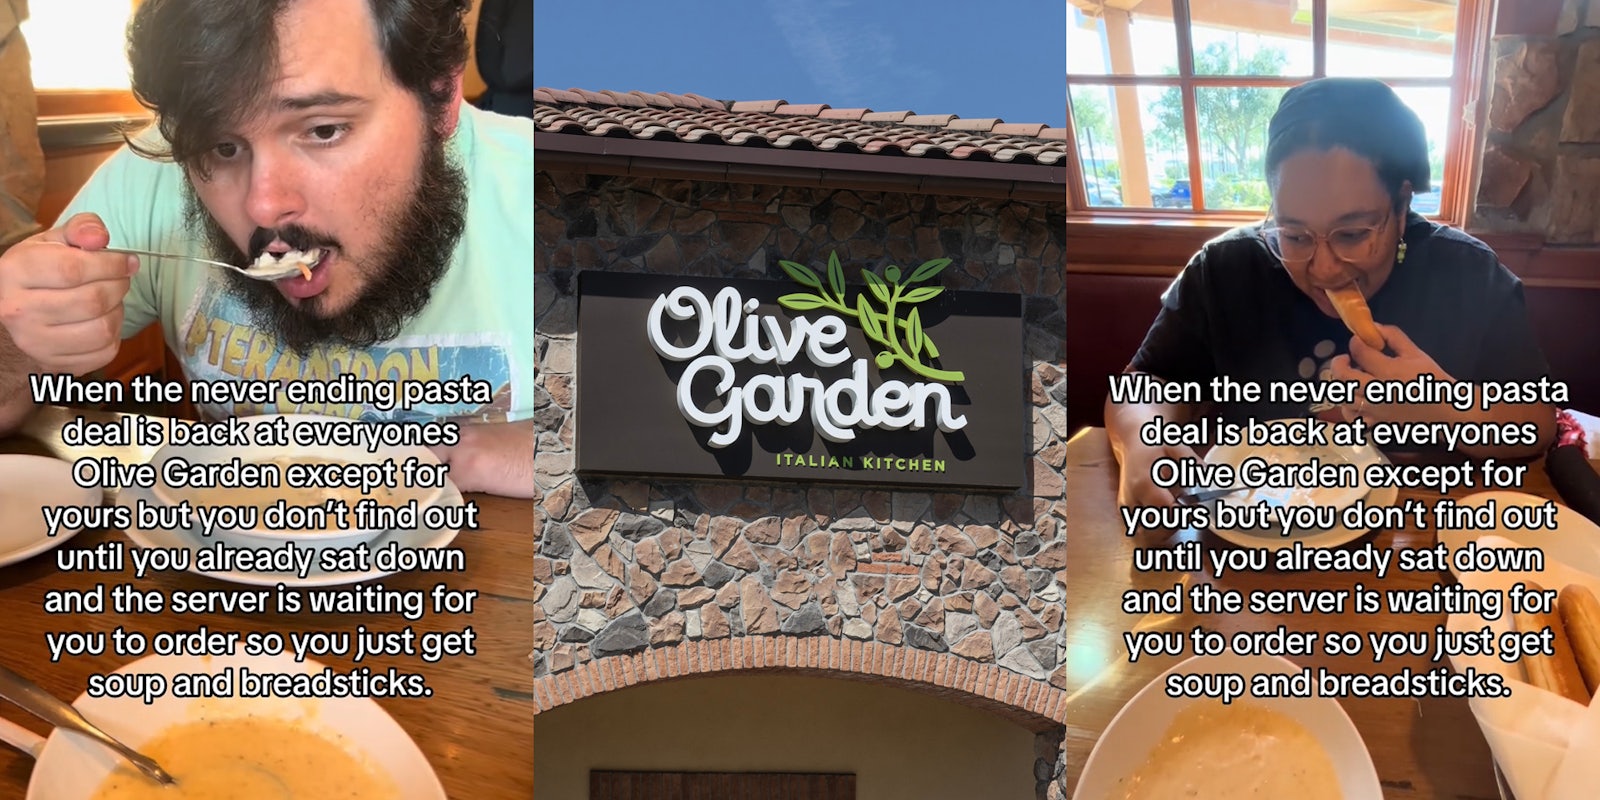 Olive Garden customer eating with caption 'When the never ending pasta deal is back at everyones Olive Garden except got yours but you don't find out until you already sat down and the server is waiting for your order so you just get soup and breadsticks' (l) Olive Garden sign on building (c) Olive Garden customer eating with caption 'When the never ending pasta deal is back at everyones Olive Garden except got yours but you don't find out until you already sat down and the server is waiting for your order so you just get soup and breadsticks' (r)